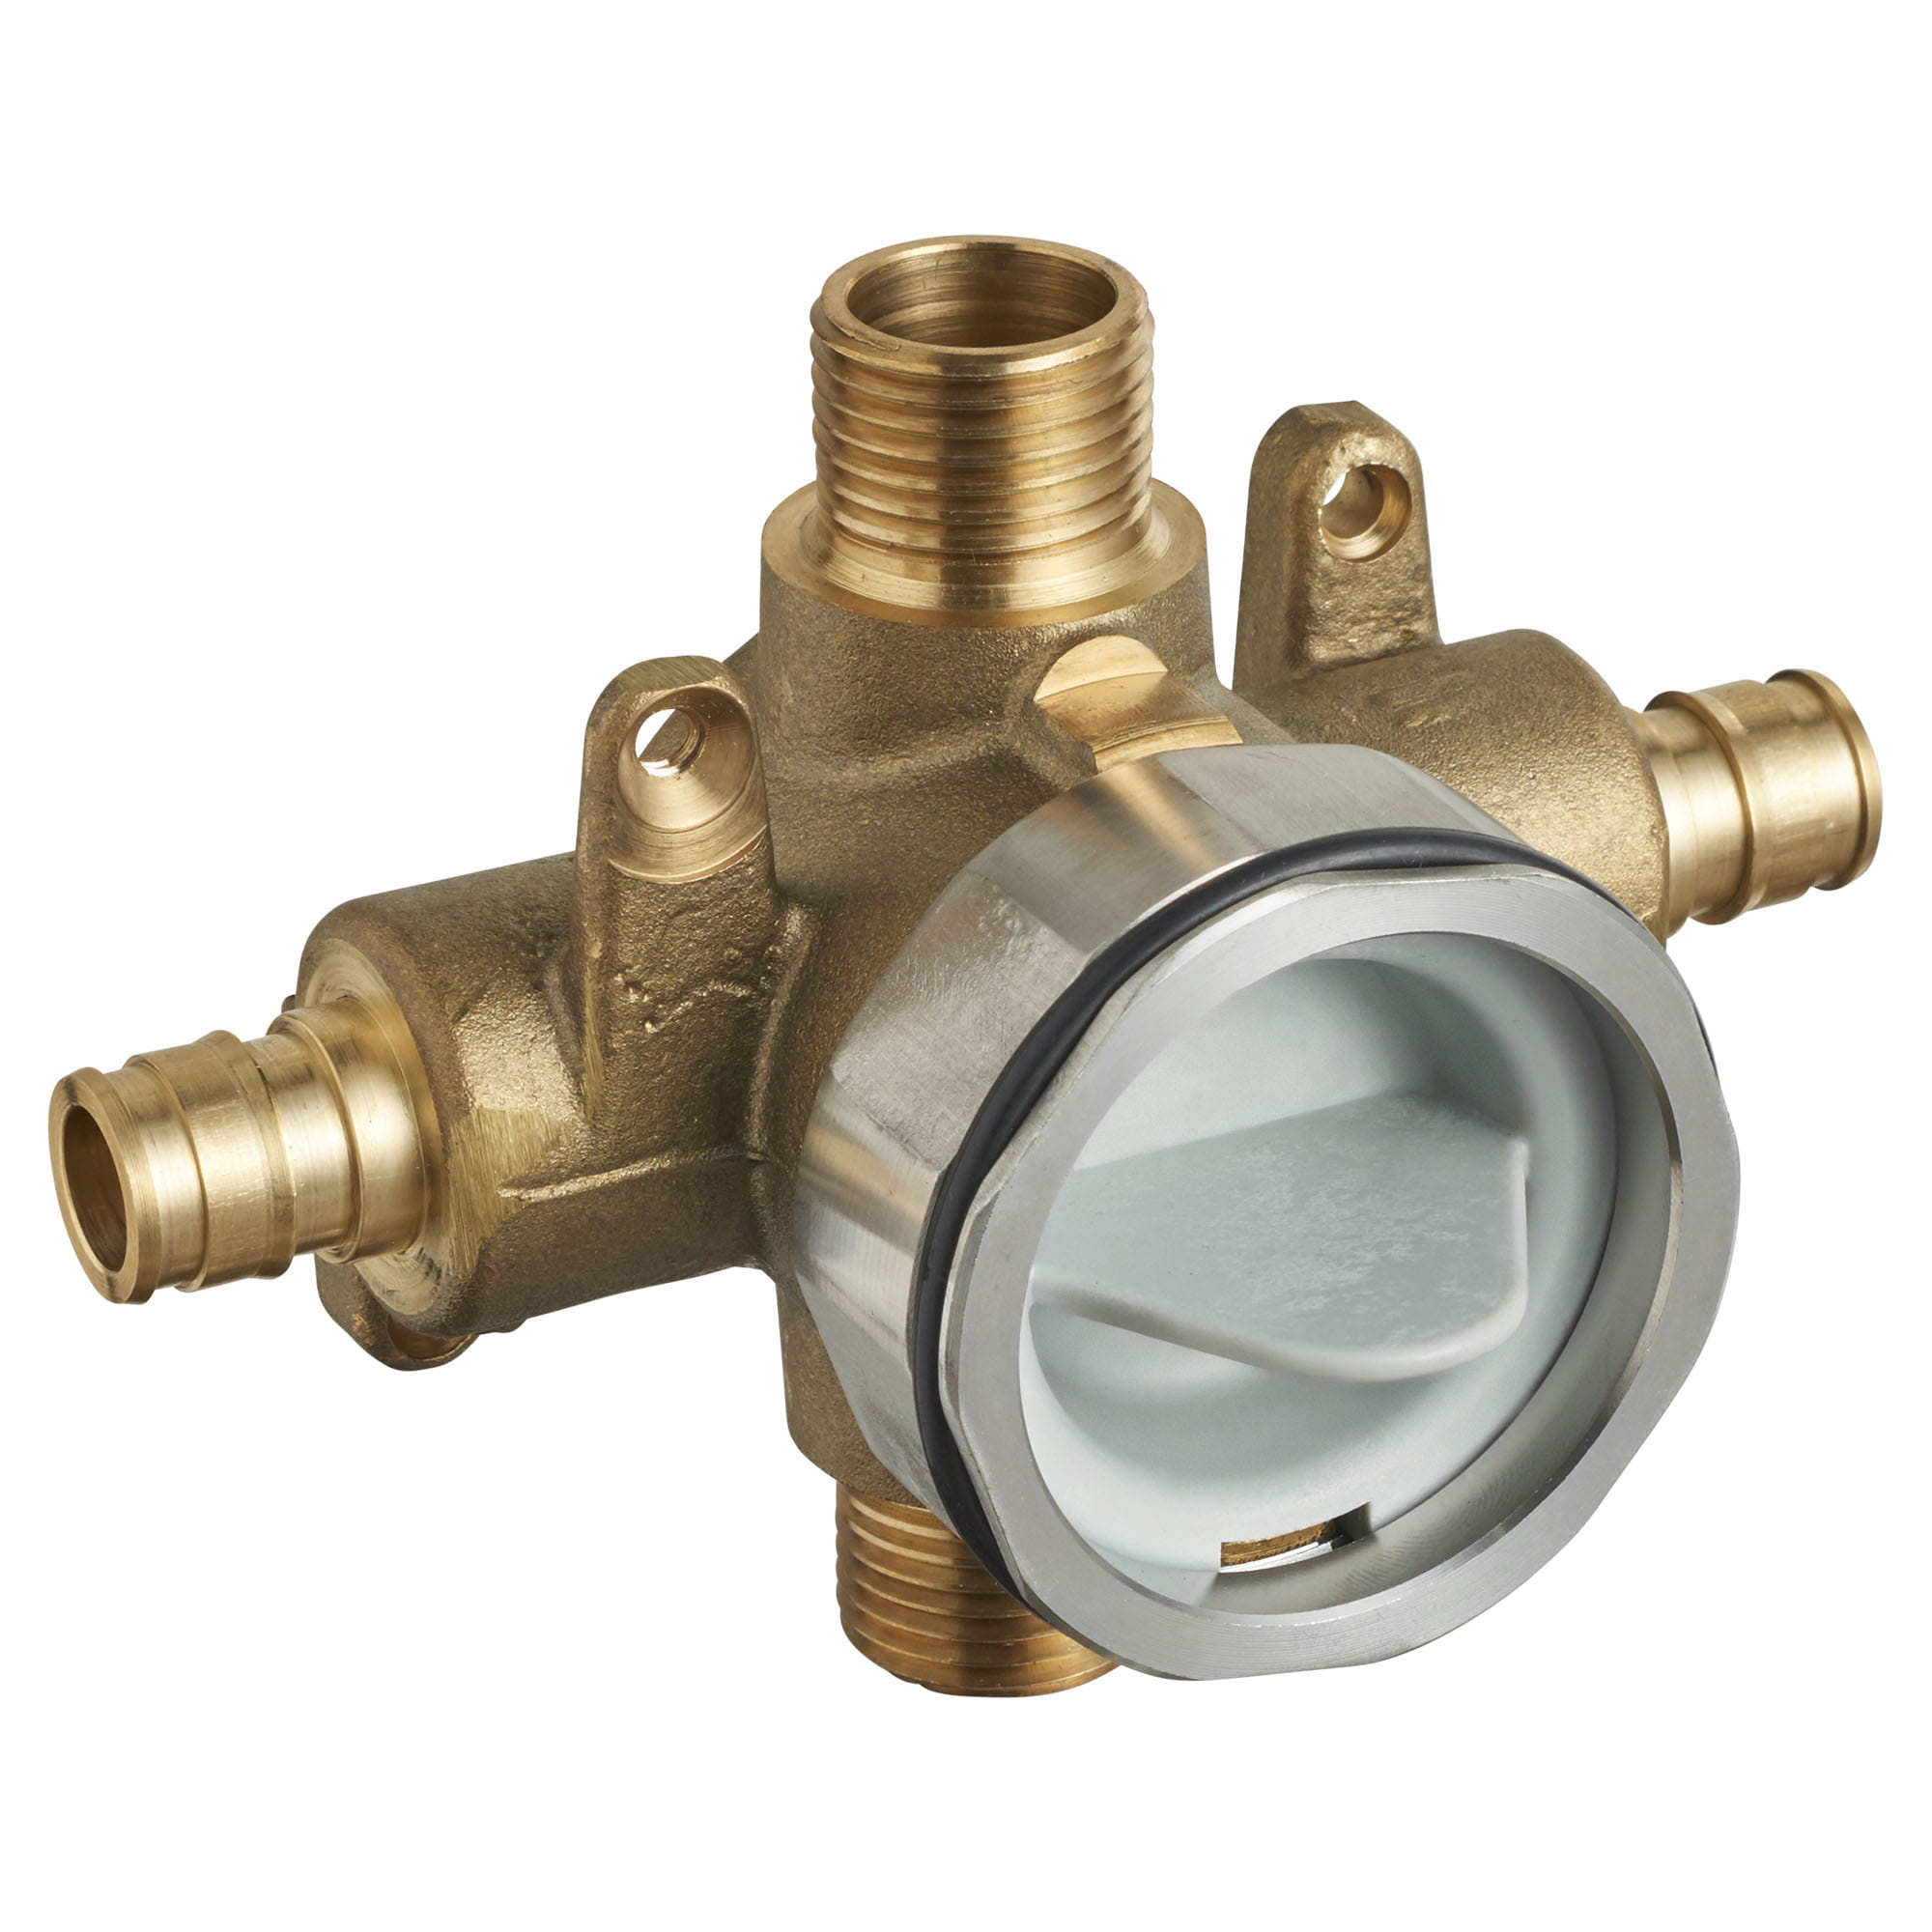 Flash® Shower Rough-In Valve With PEX Inlets/Universal Outlets for Cold Expansion System